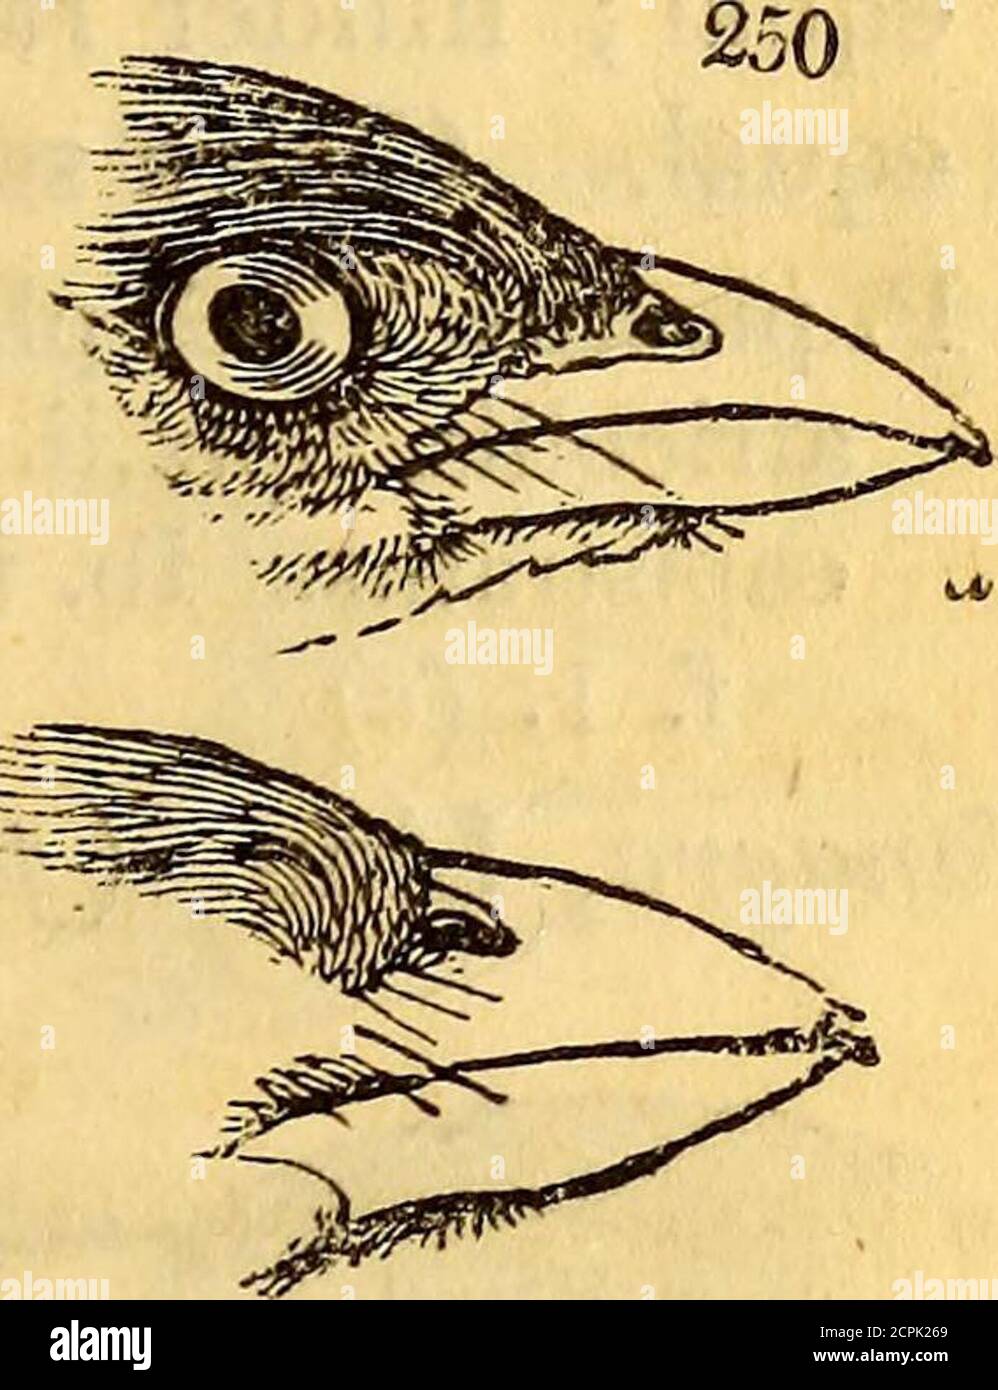 . On the natural history and classification of birds . ved^and much lengthened. The hinder toe of equallength with the claw. L. canabina. Selby, i. pi. 55. f. 3.4, Leucosticte, Sw. Bill tumid. Commissure regularlycurved. Wings much lengthened. Tarsus lengthened,,slender. Hind claw very long. L. tephrocotis. N. Z. pi. 50. Chloris. Greenfinch. Bill larger and stronger: thecommissure straight. Claws smaller, and more curved.C. flavigaster. Selby, i. pi. 54. f. 3.Subfam. TANAGRINiE. Tanagers. Bill unequally conic ; the upper mandible more or less arched, and very distinctly notched. Feet formed fo Stock Photo